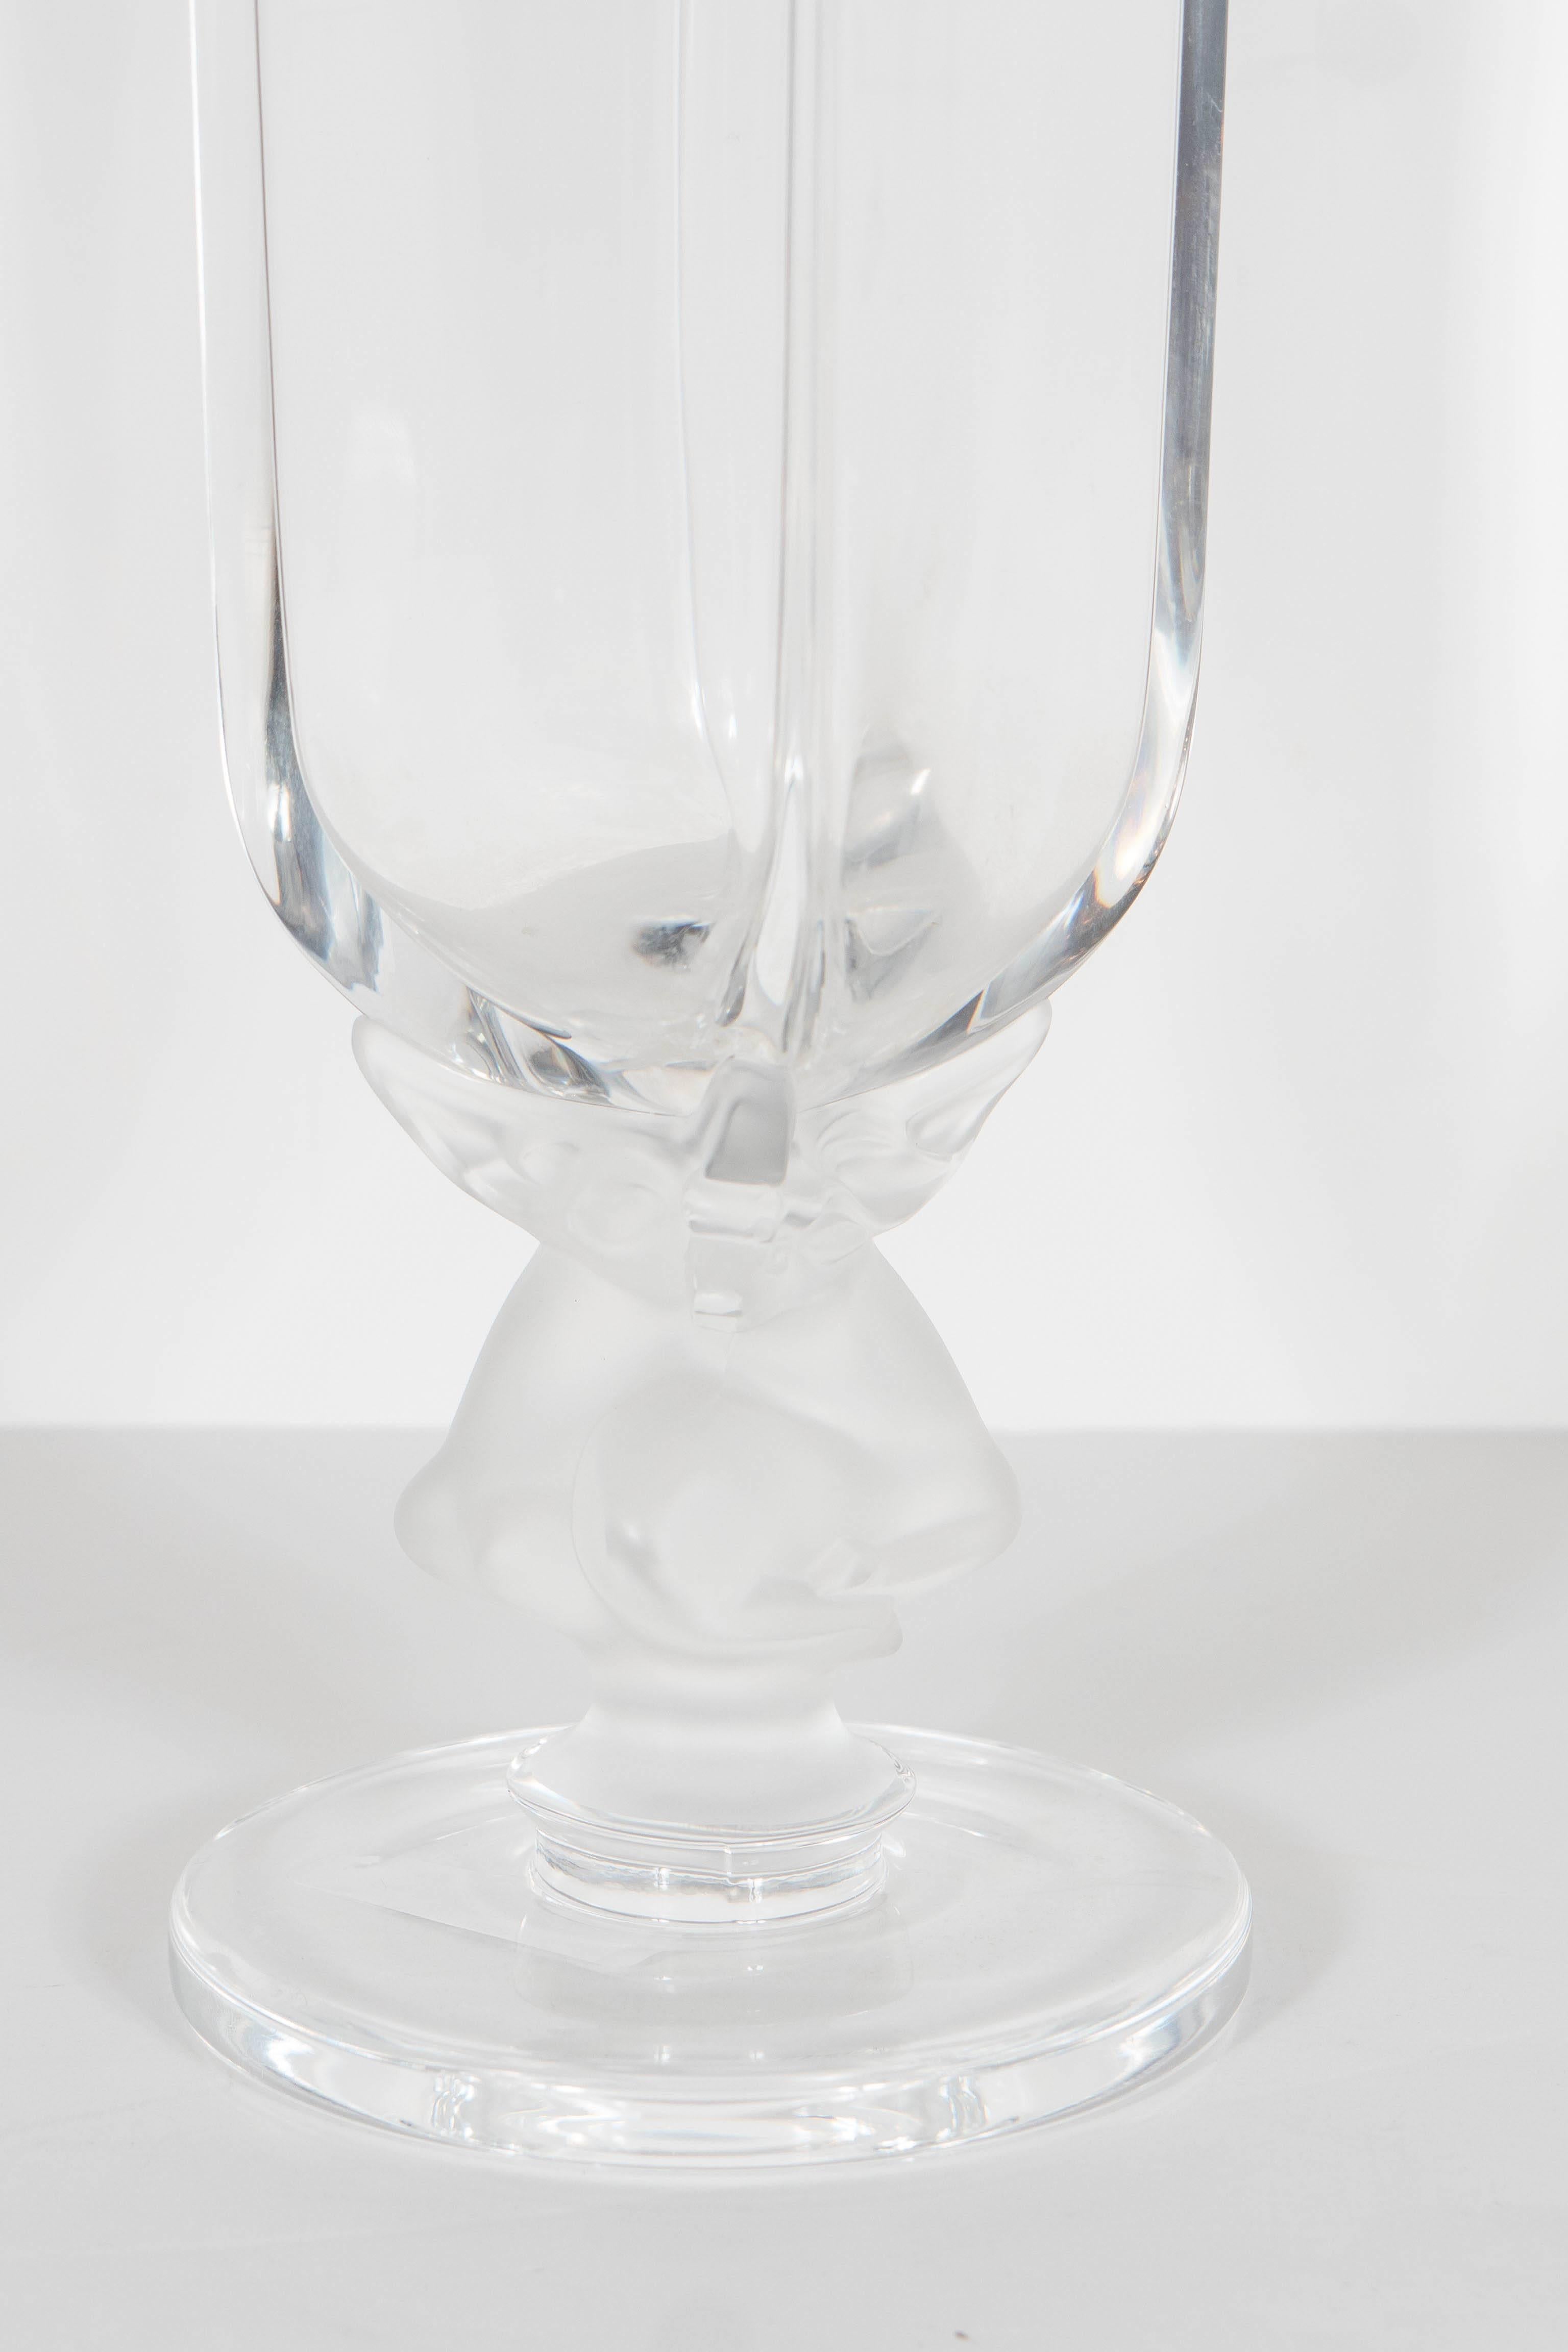 This elegant Lalique crystal vase features a rectangular form sitting atop of a frosted glass support, which appears from a distance like amorphous organic sculptural forms. Upon closer inspection, however, one sees that they are perfectly